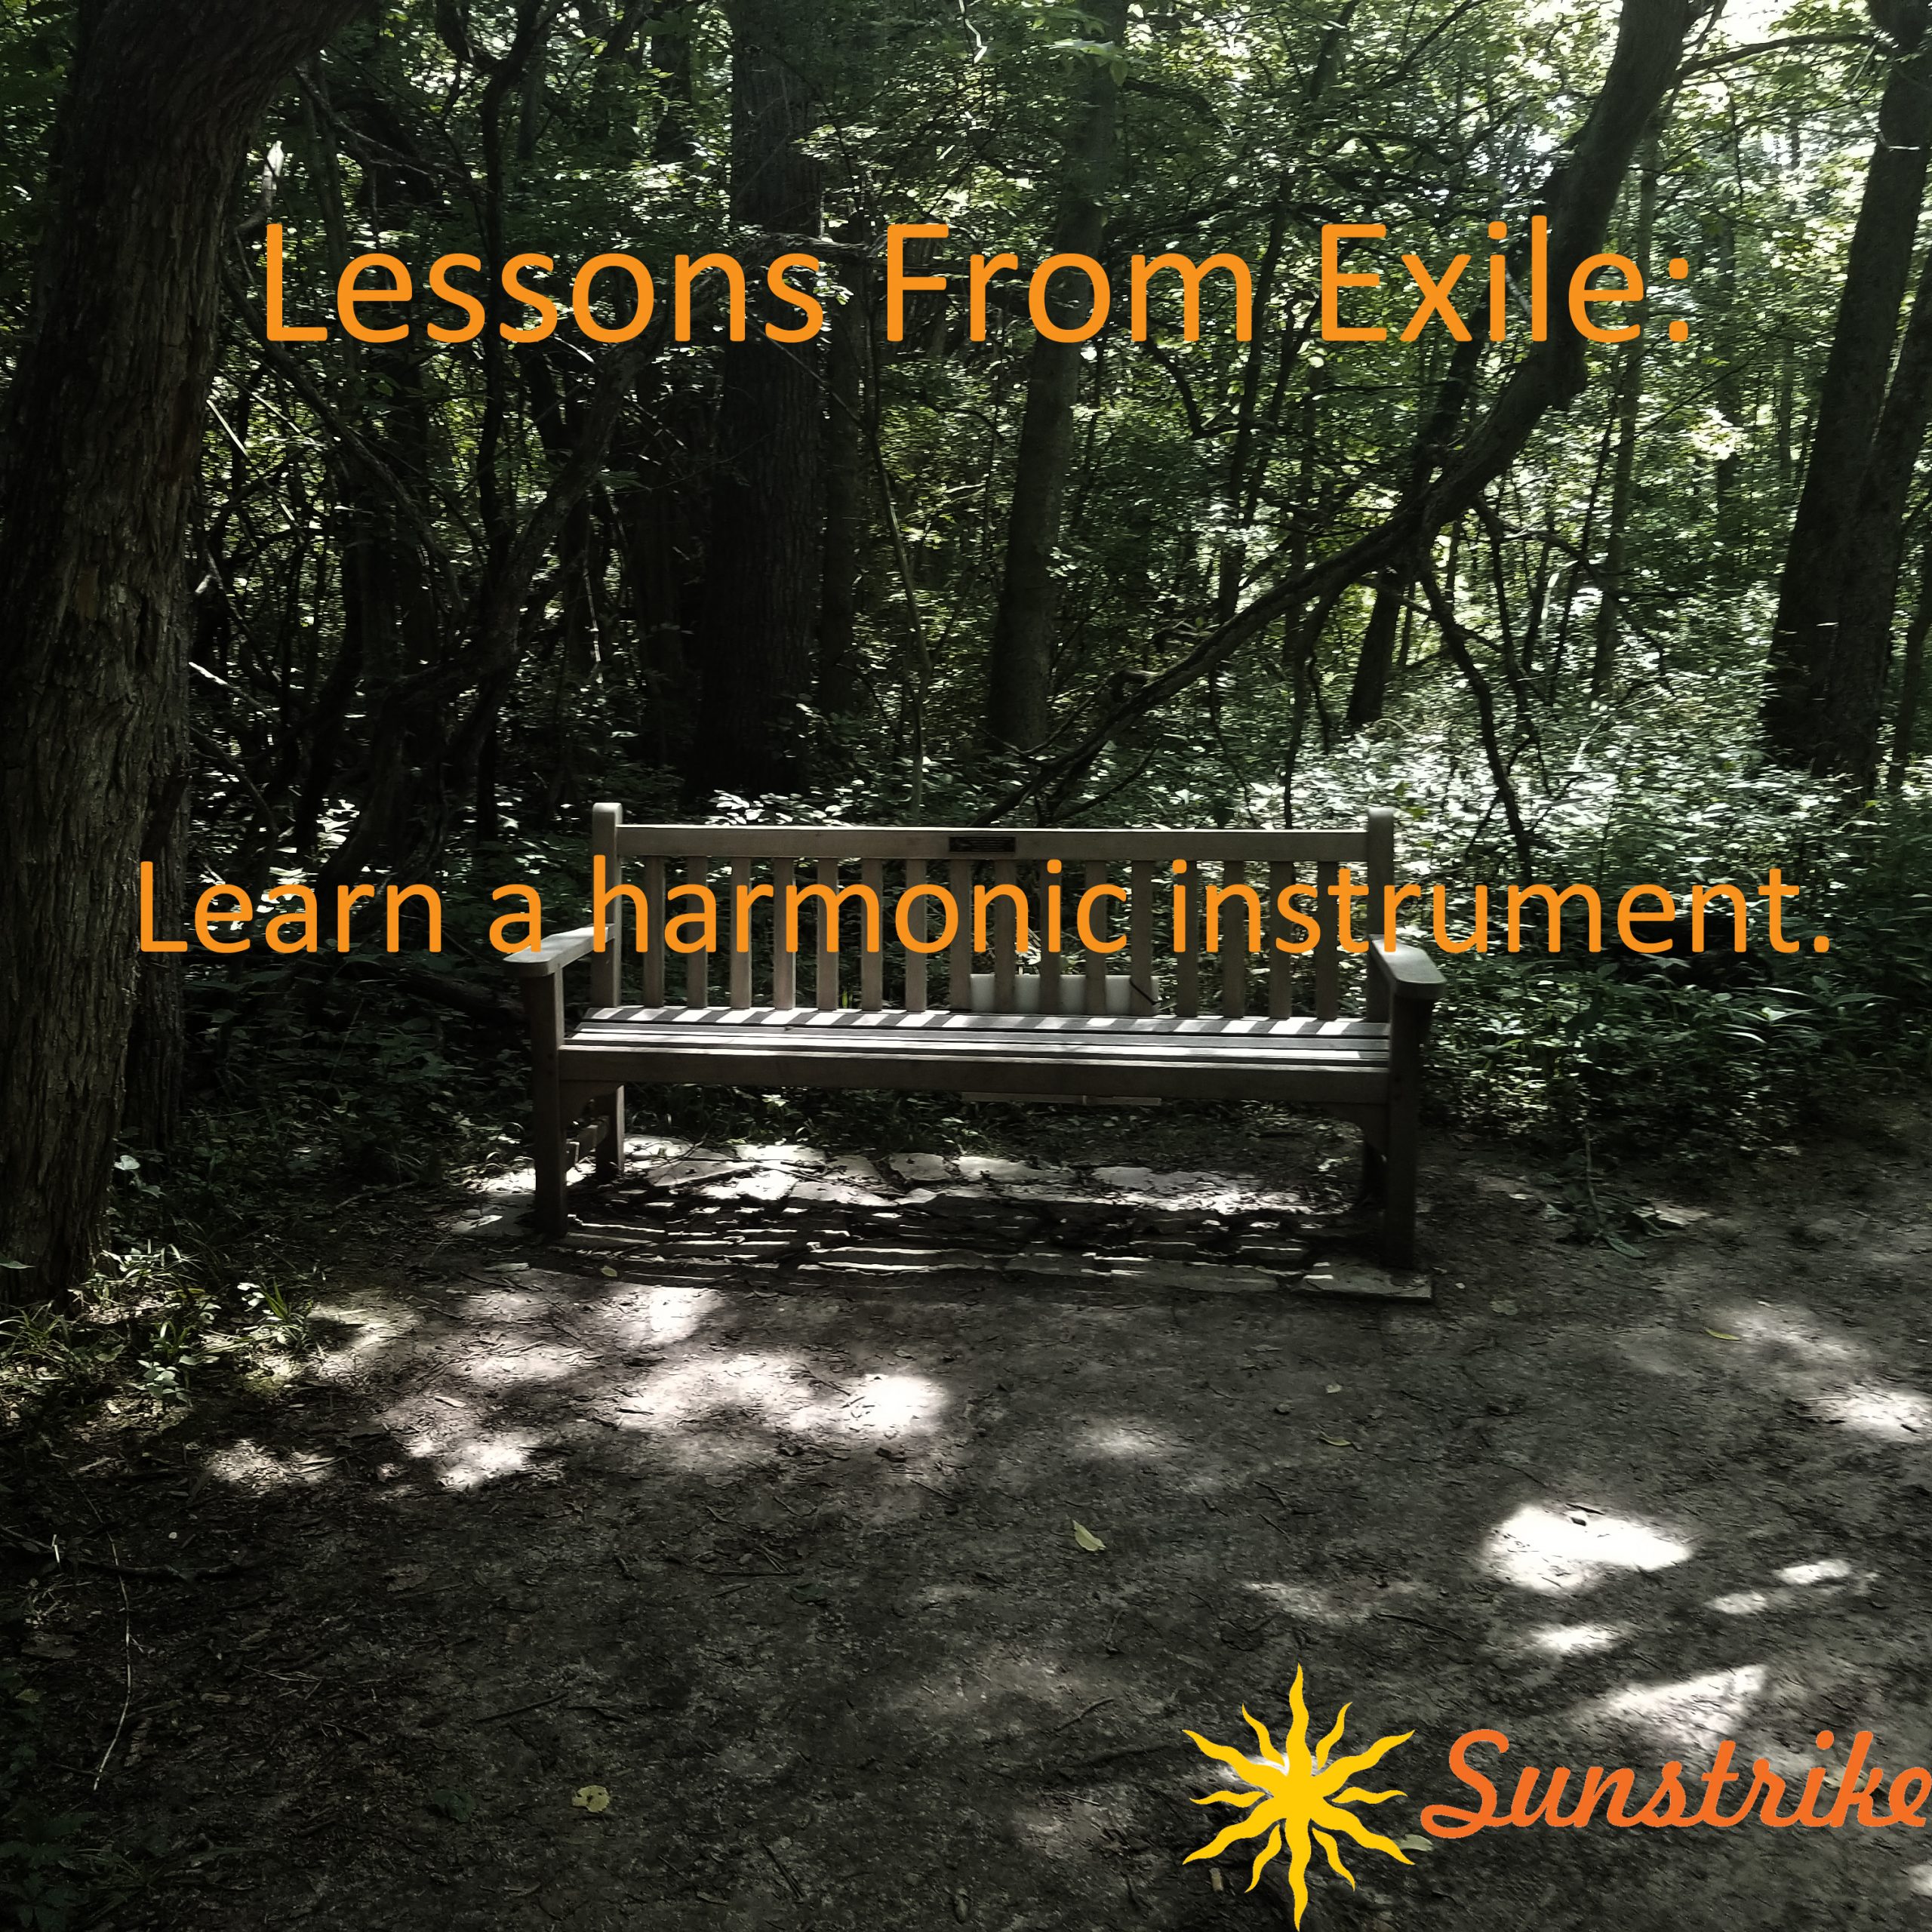 Lessons from Exile #4: Learn a harmonic instrument.